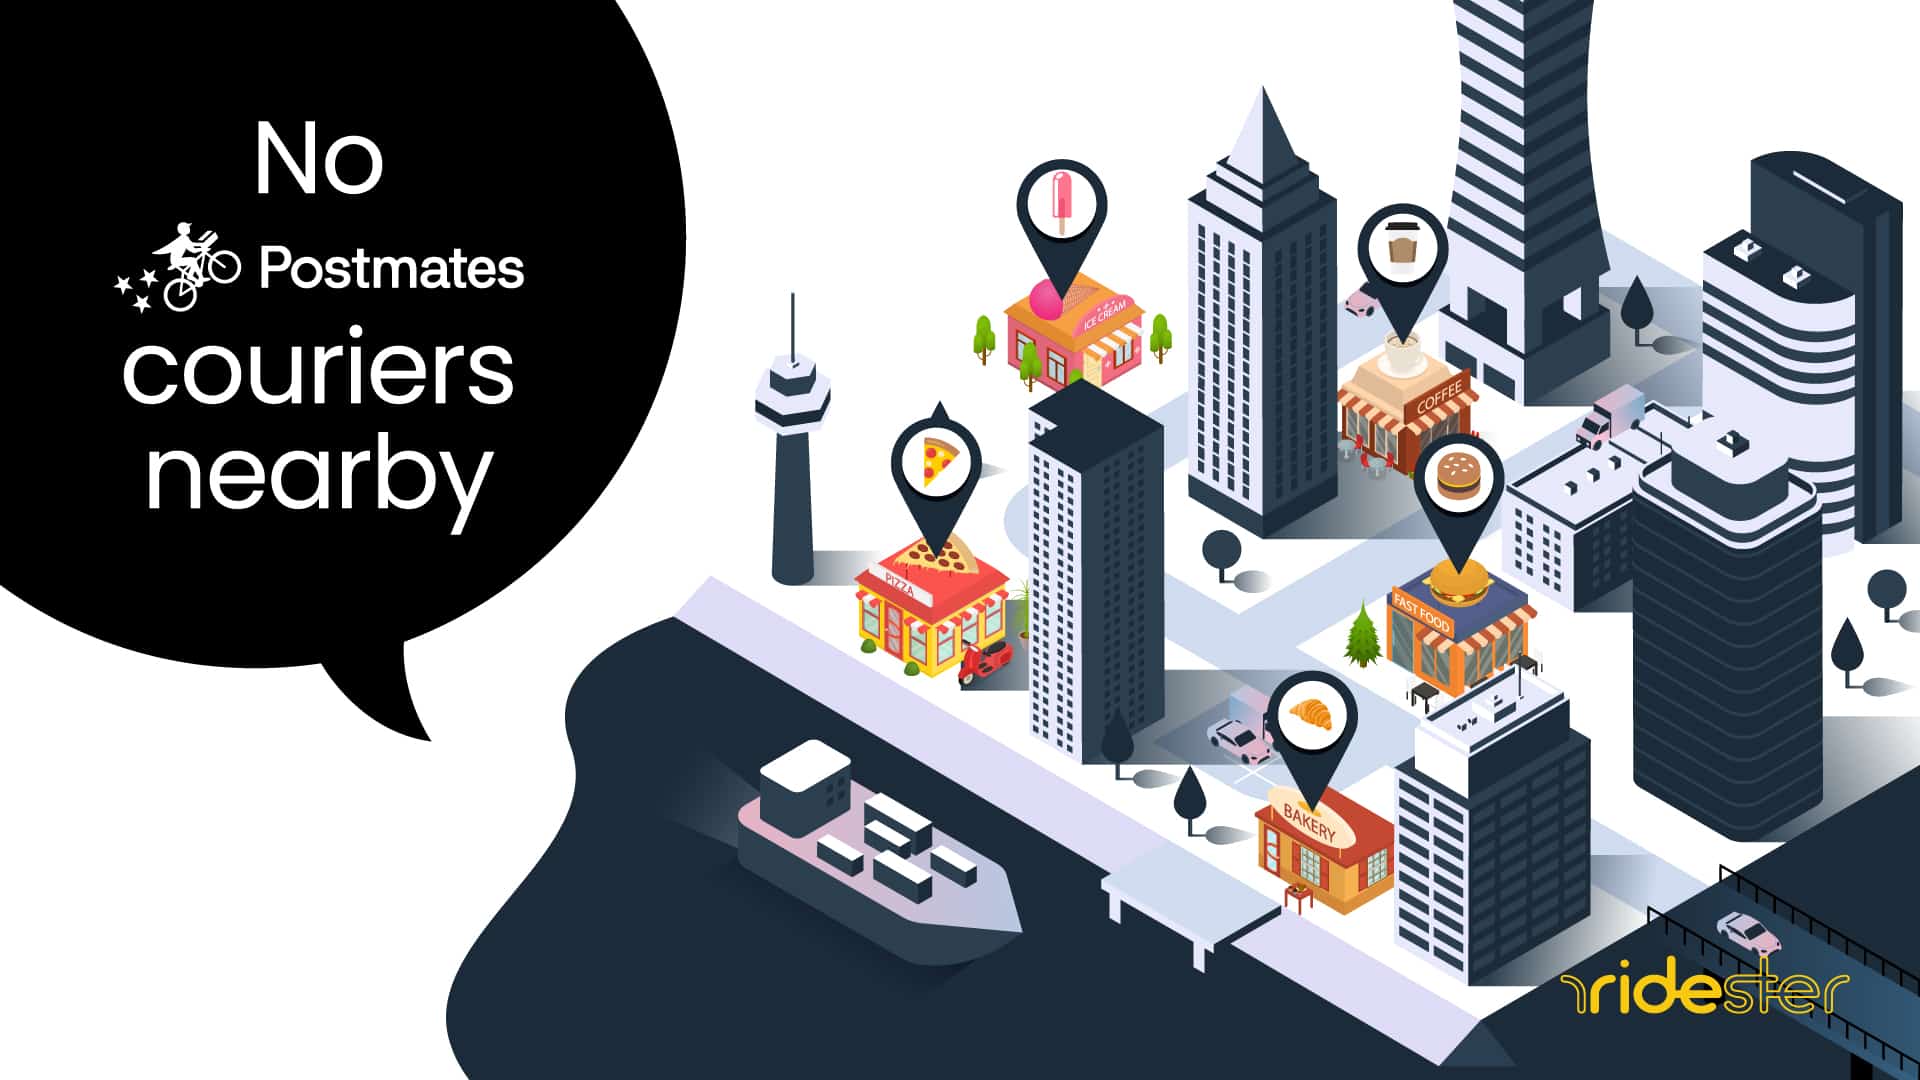 vector graphic showing a city map with the next "no postmates couriers nearby" in a text bubble above the city